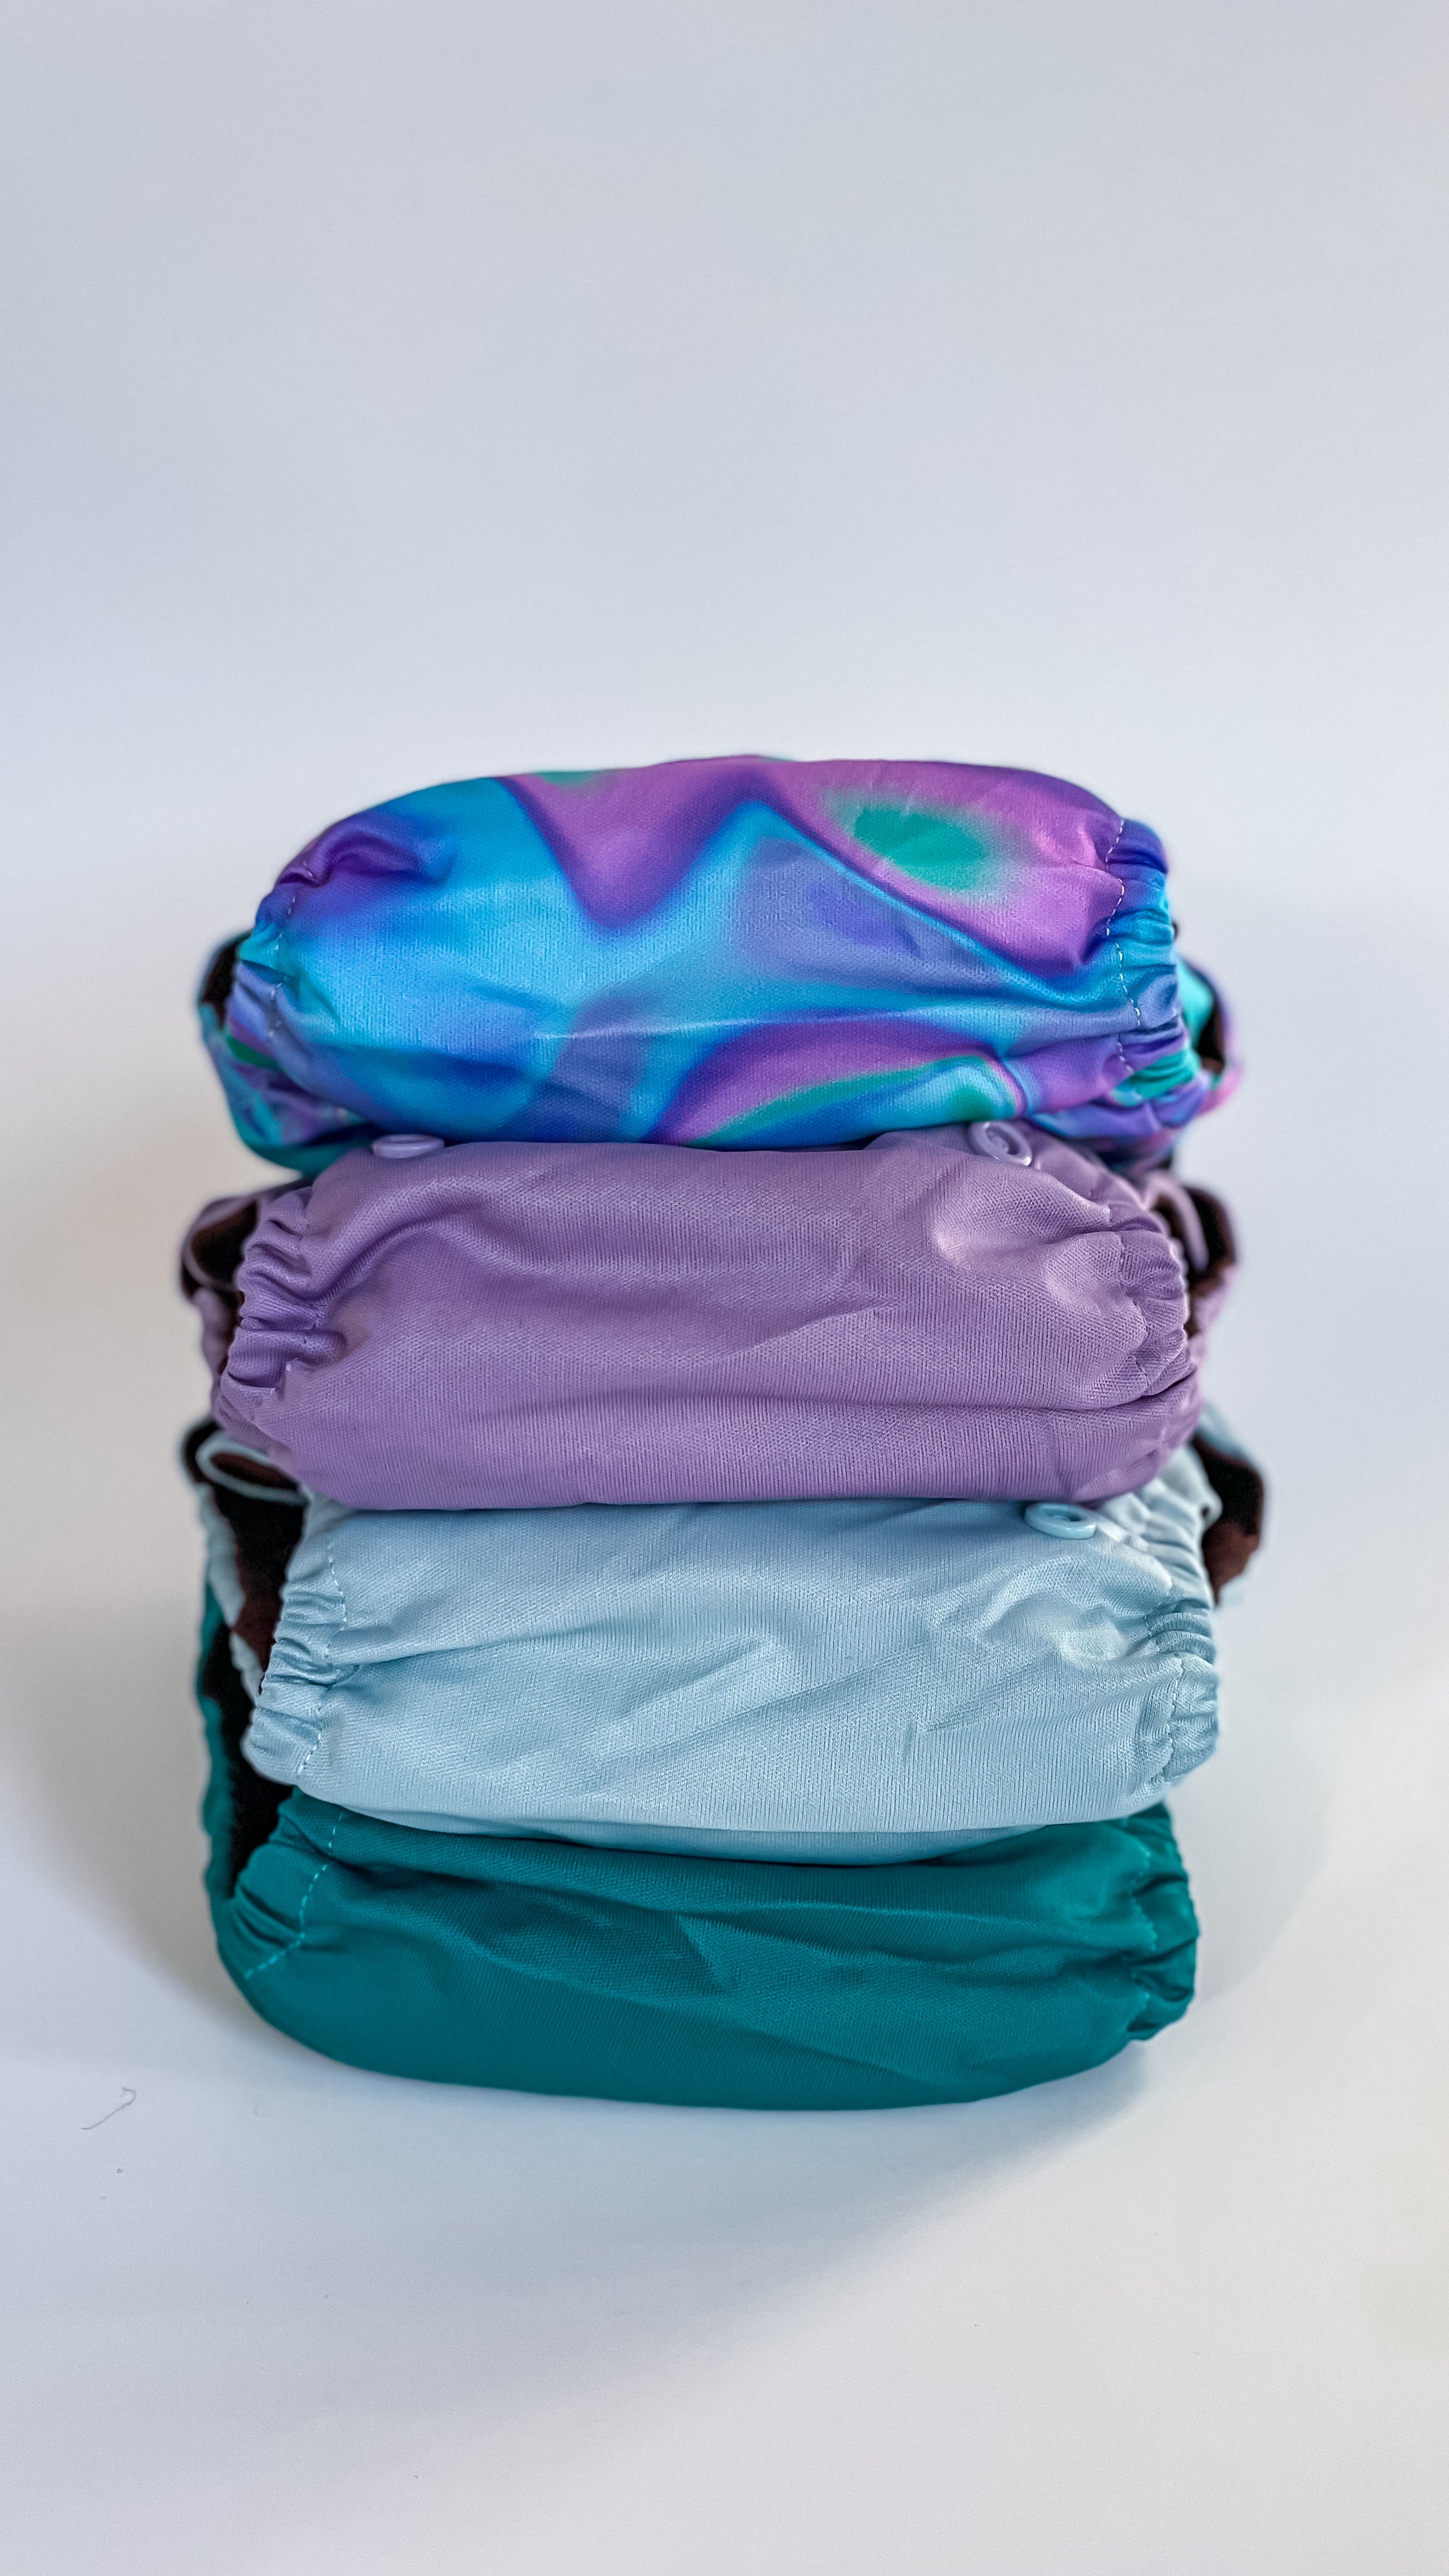 Stack of Jubel reusable nappies in colours Nordlicht, lilac, duck egg, and teal